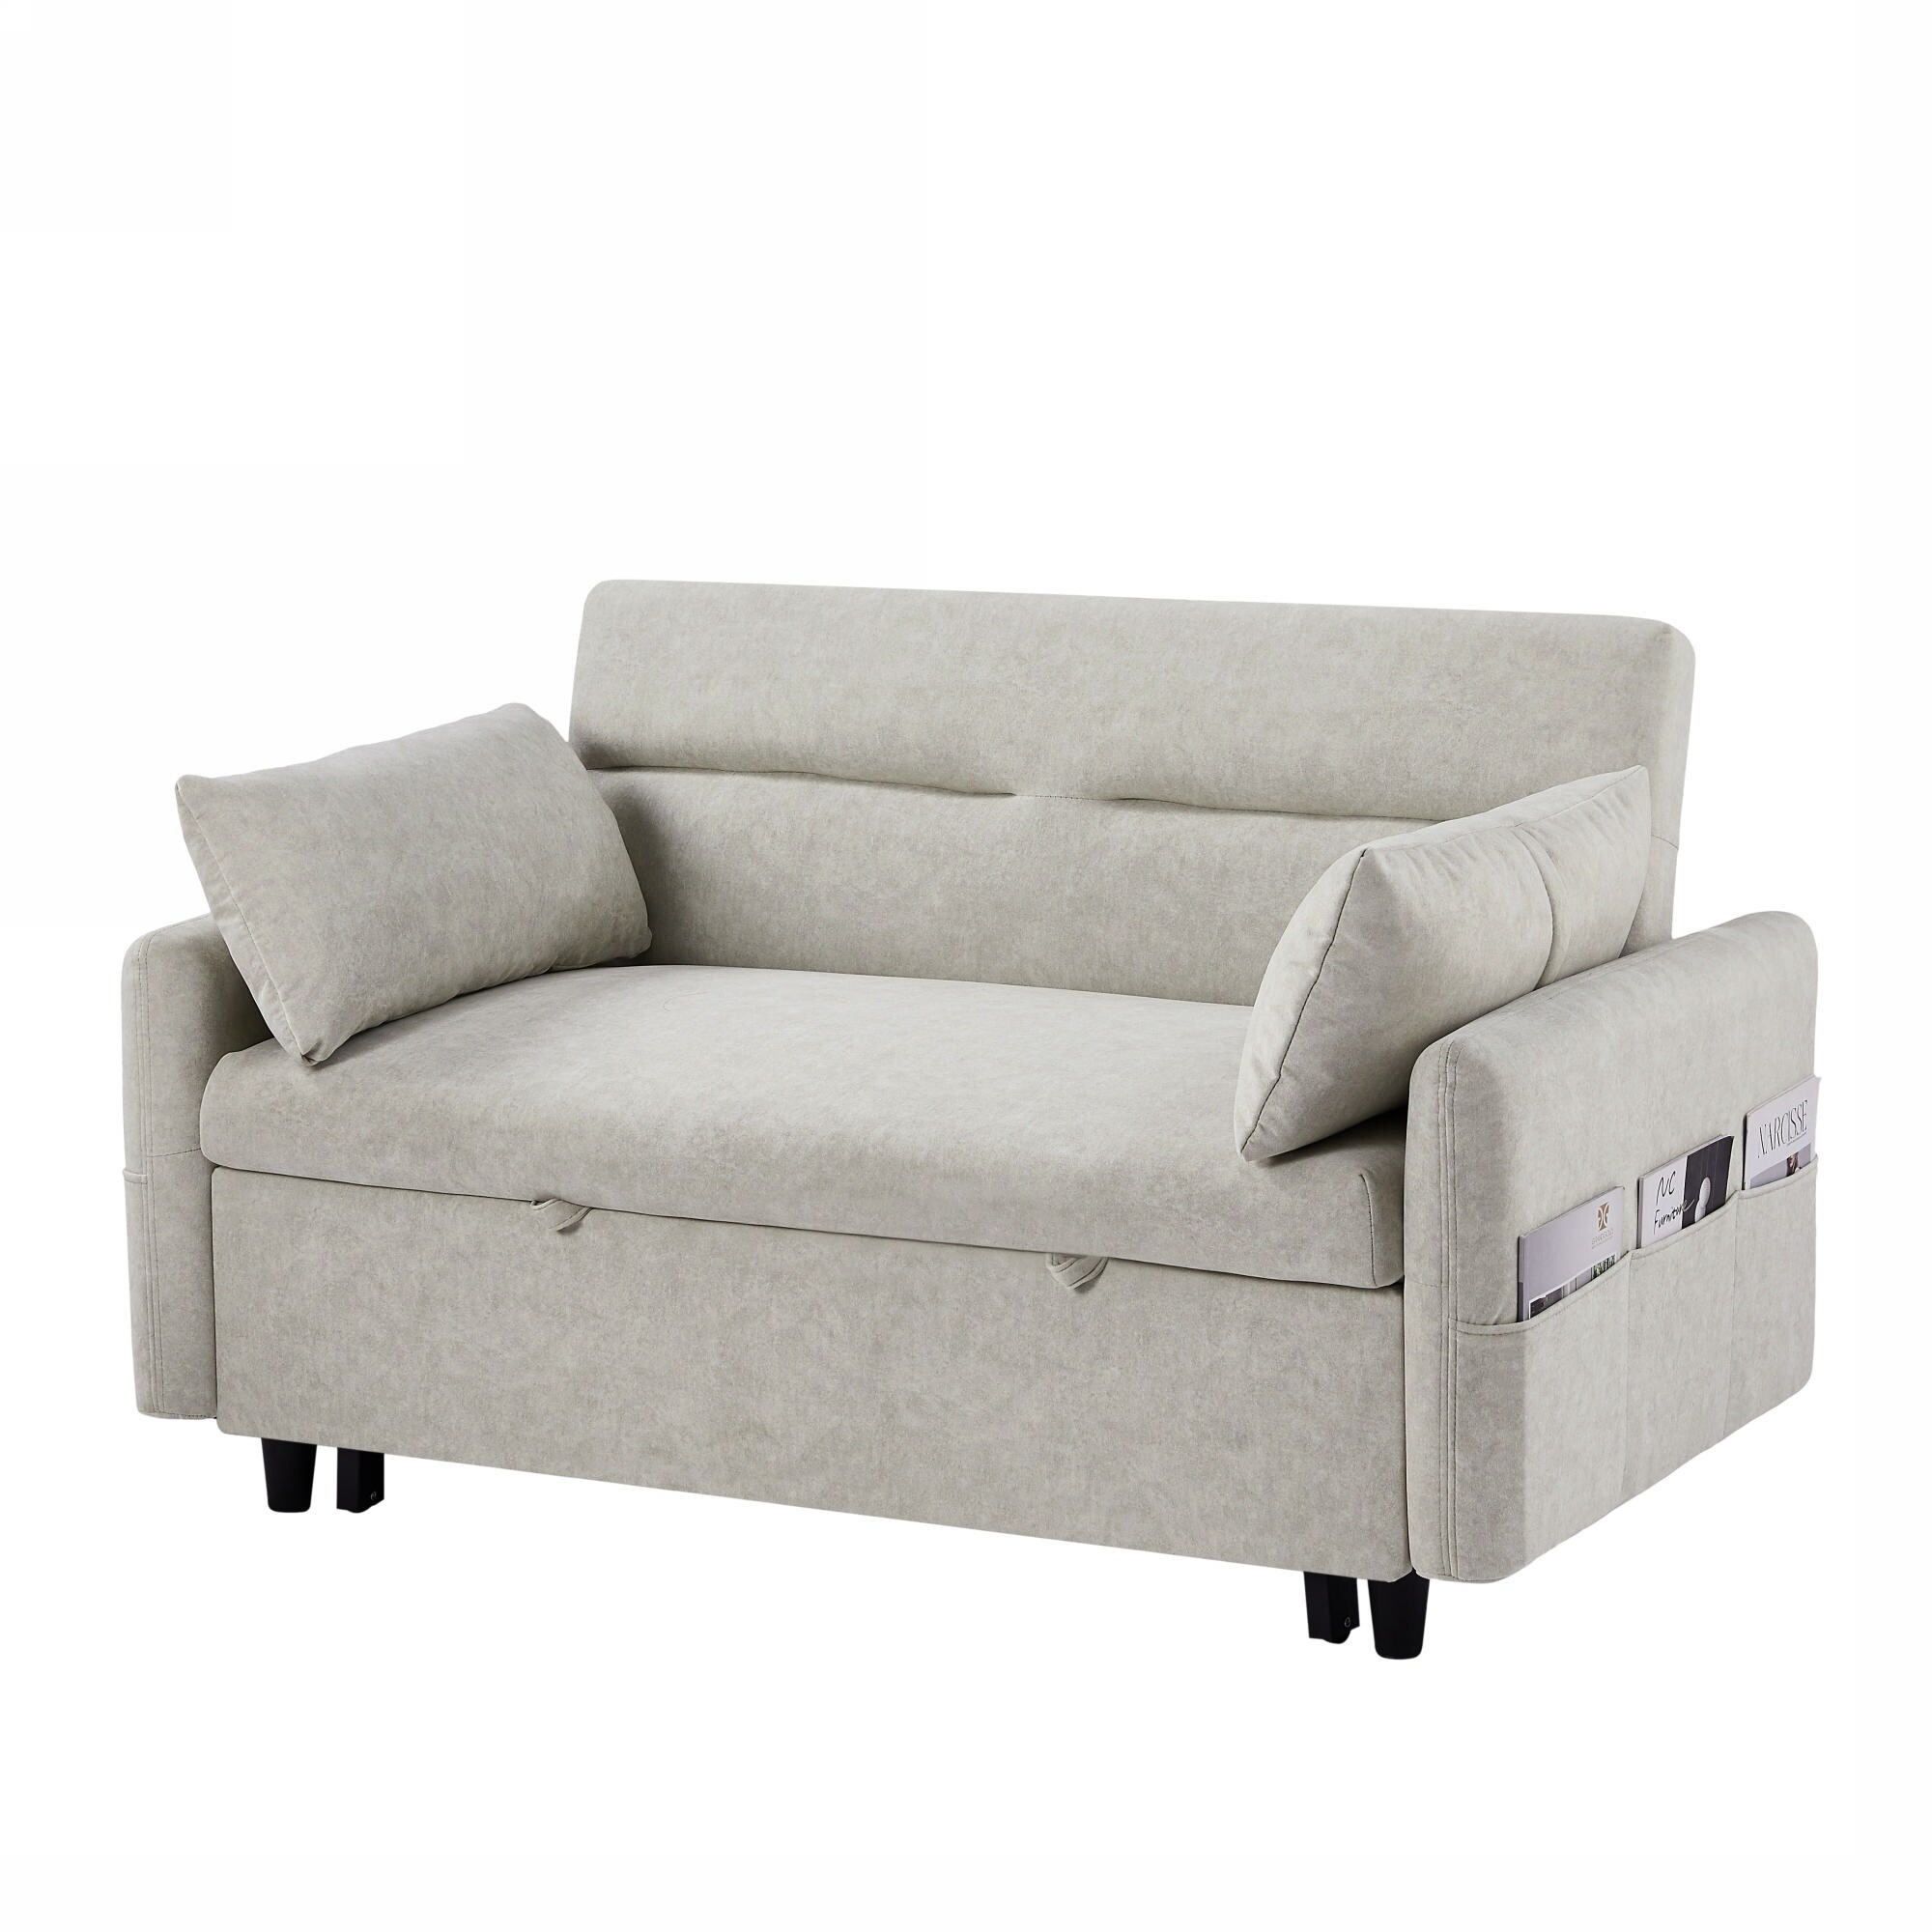 Microfiber Pull-Out Sofa Bed with Backrest, Pockets, Pillows